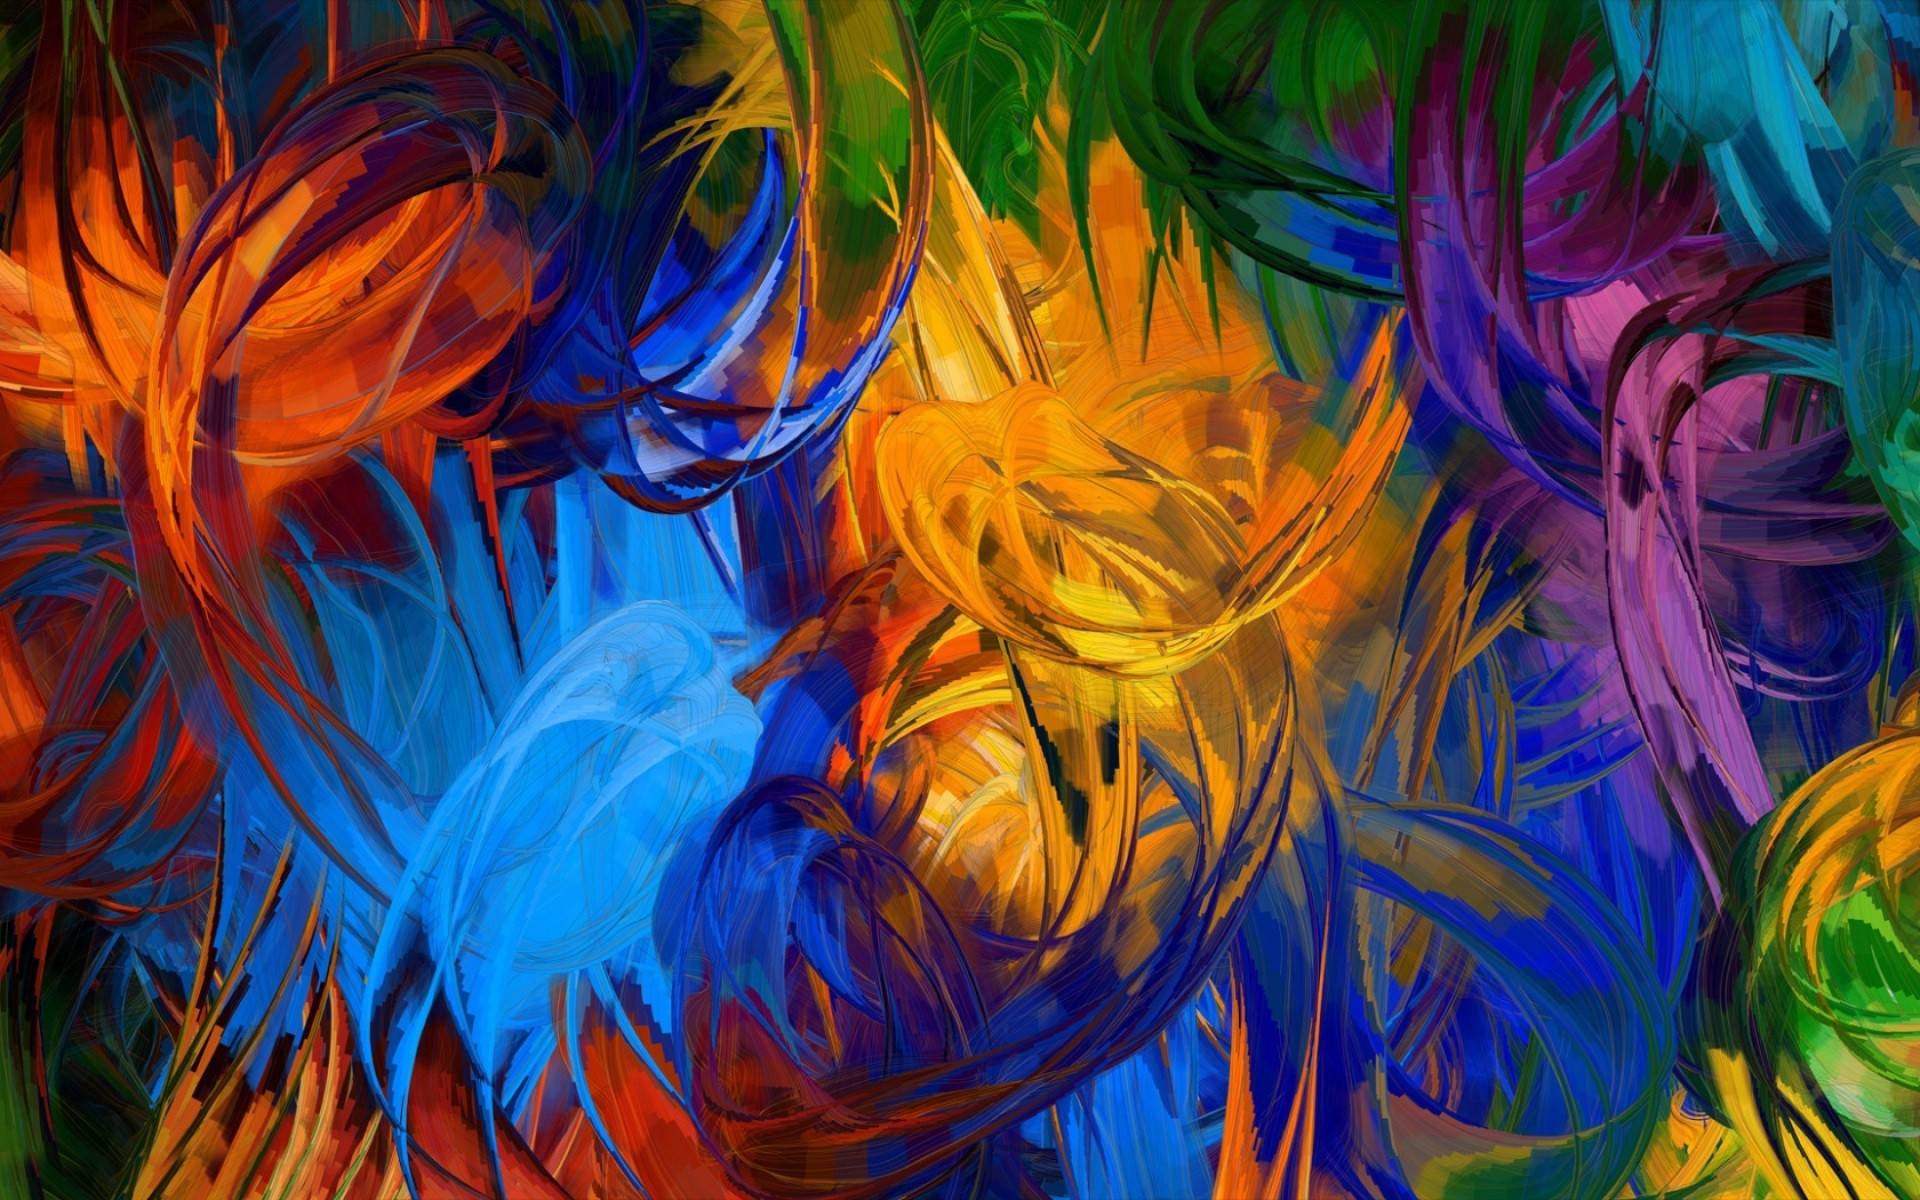 Abstract Paintings 19201200 Wallpaper 2196191 1920x1200